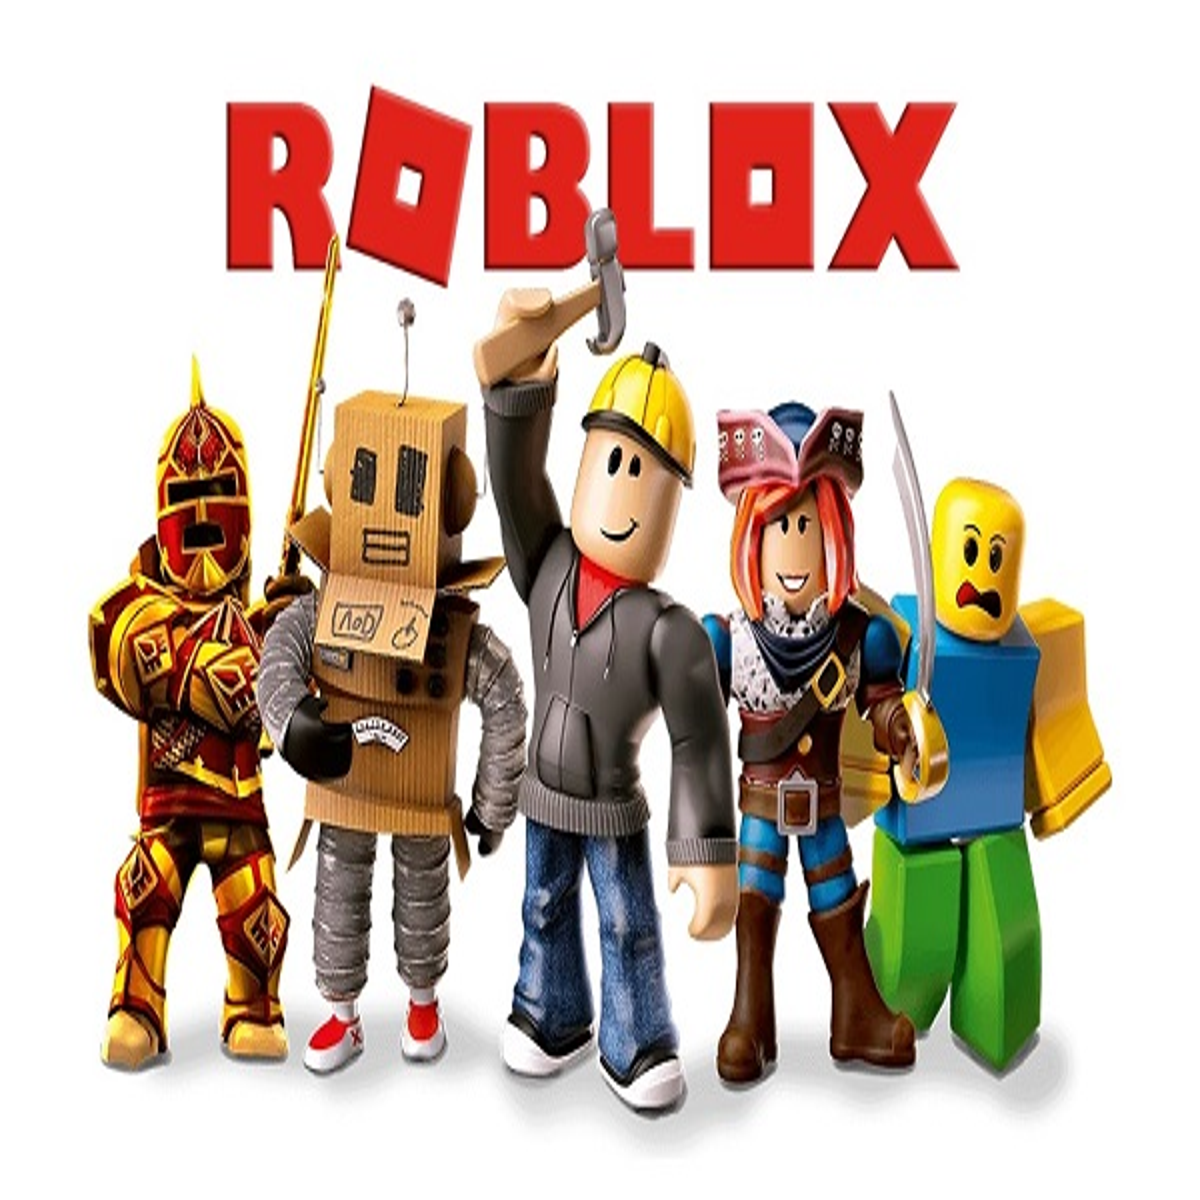 Online Casinos, Roblox, and Children Linked in Report 